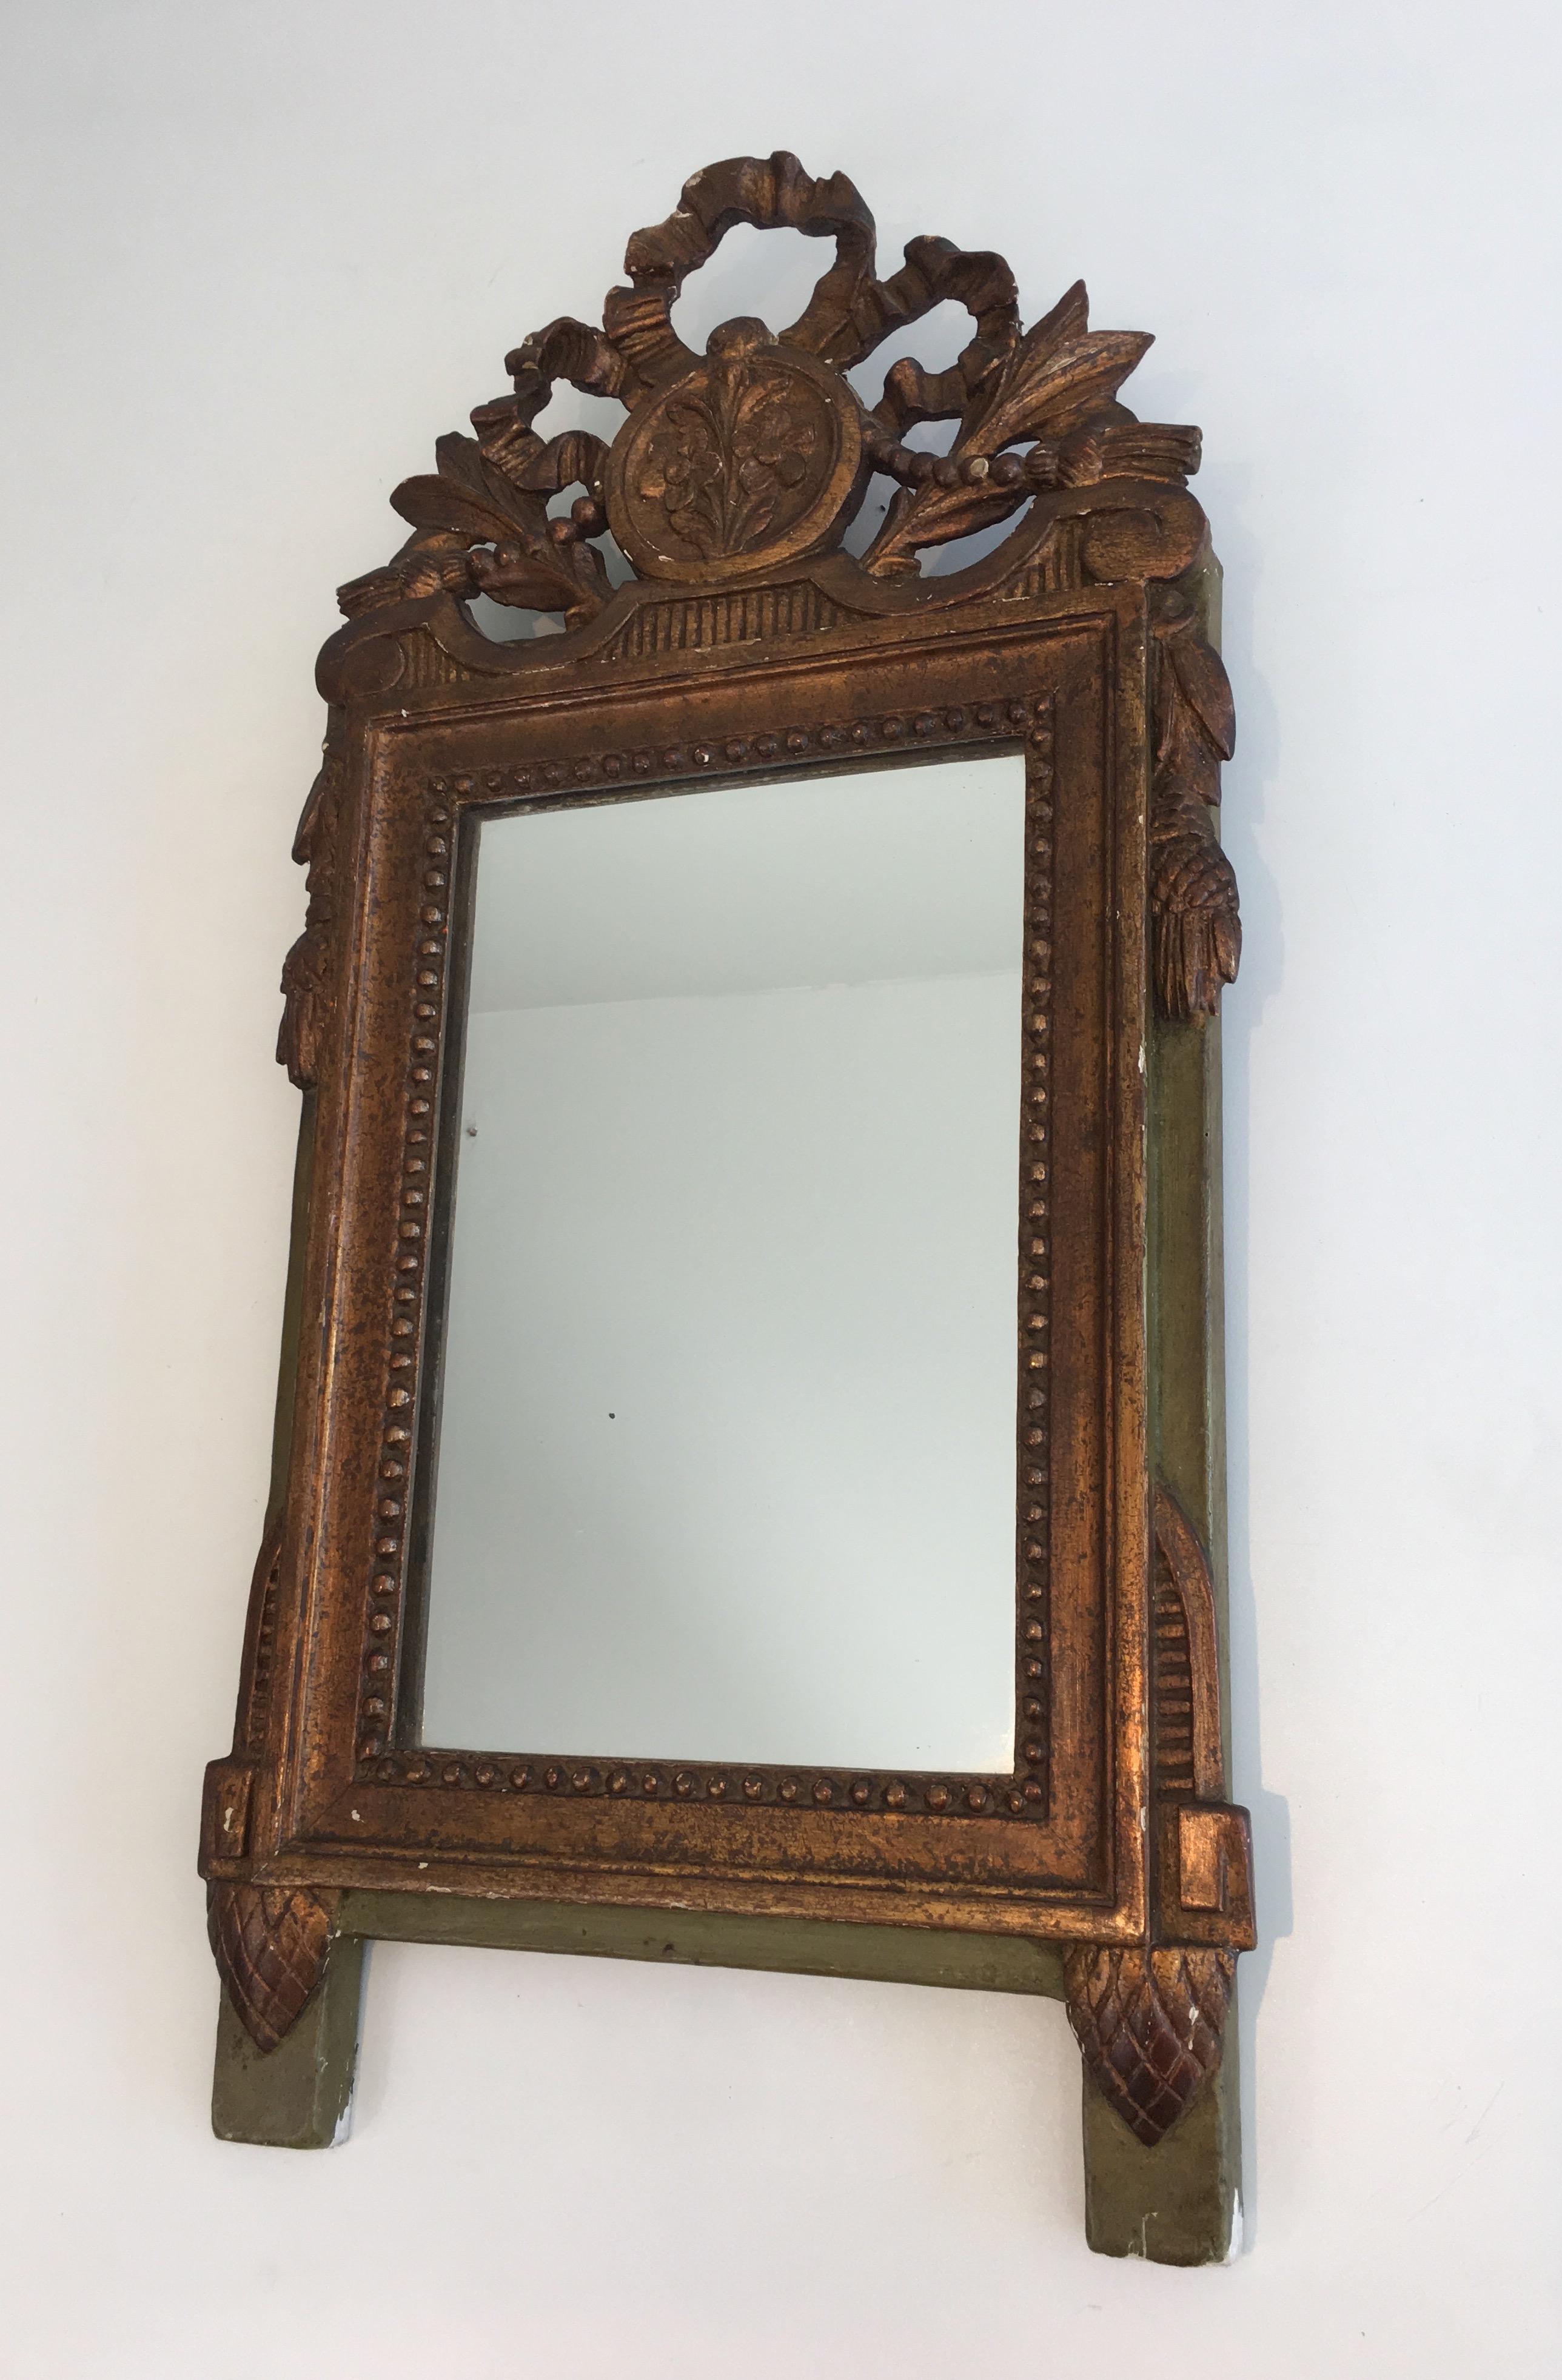 Louis XVI Louis the xvi Style Gilt and Painted Wood Mirror, French, 19th Century For Sale